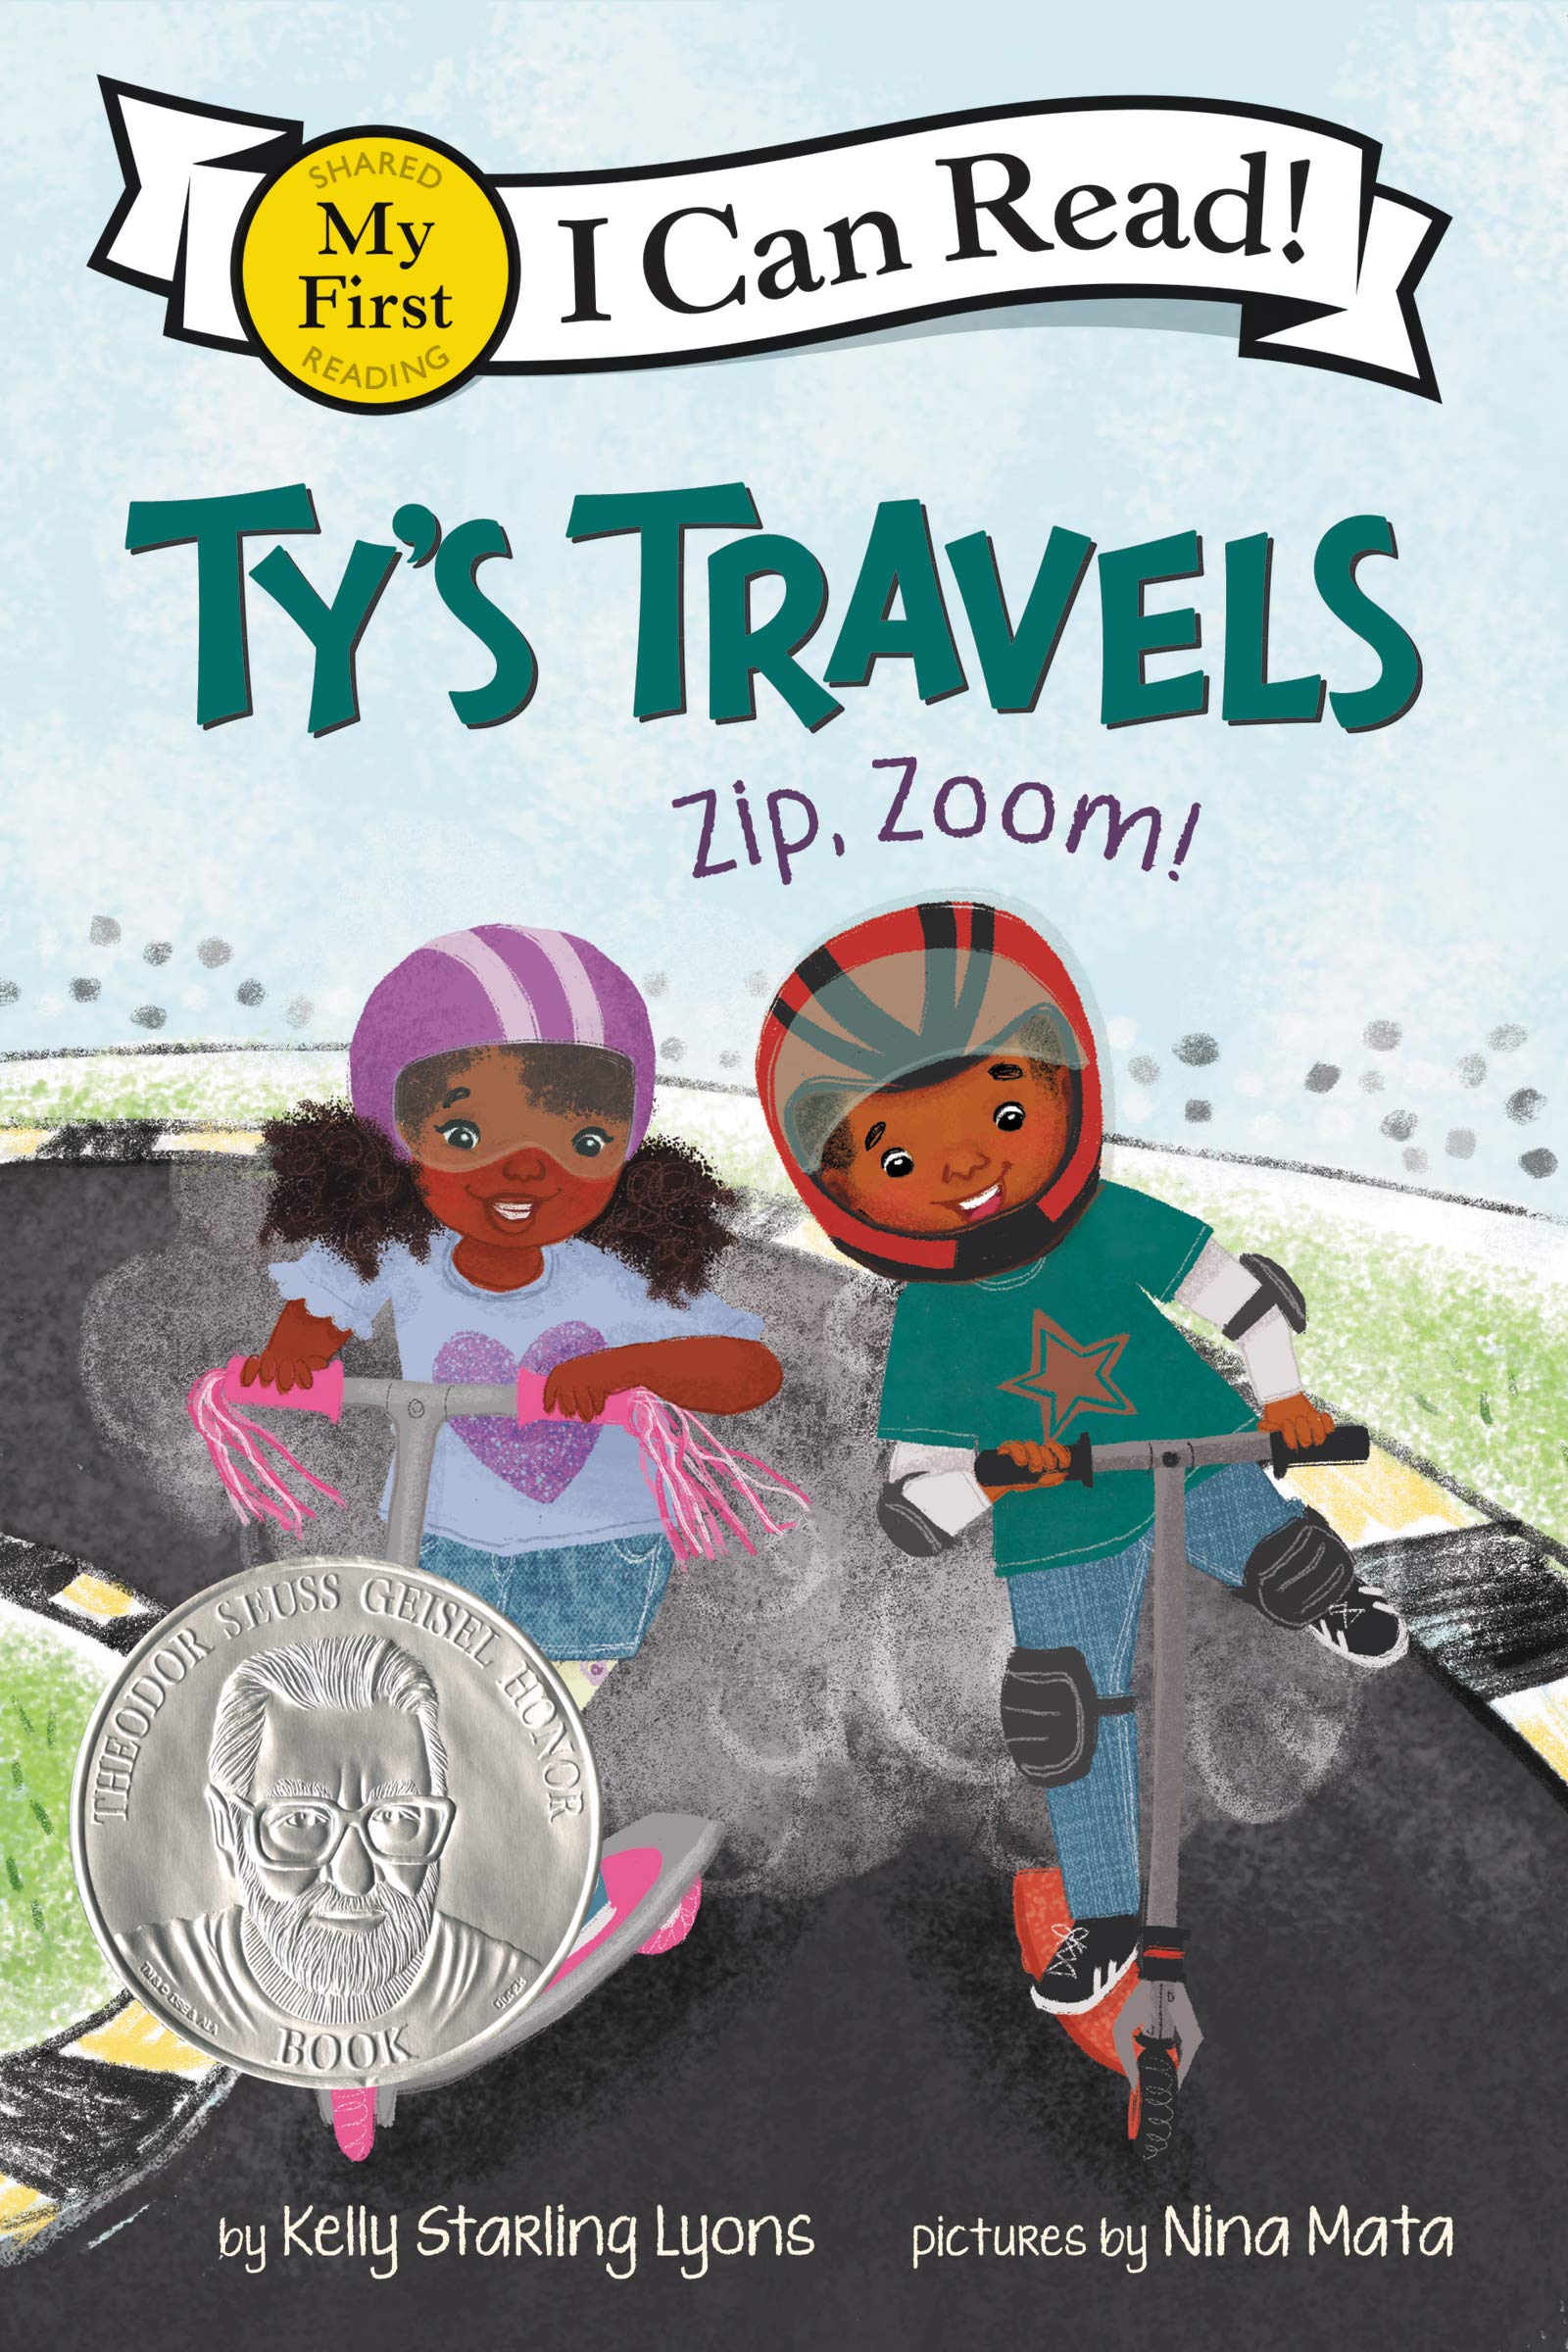 on the cover of Ty's Travels a young girl and a boy ride a bike